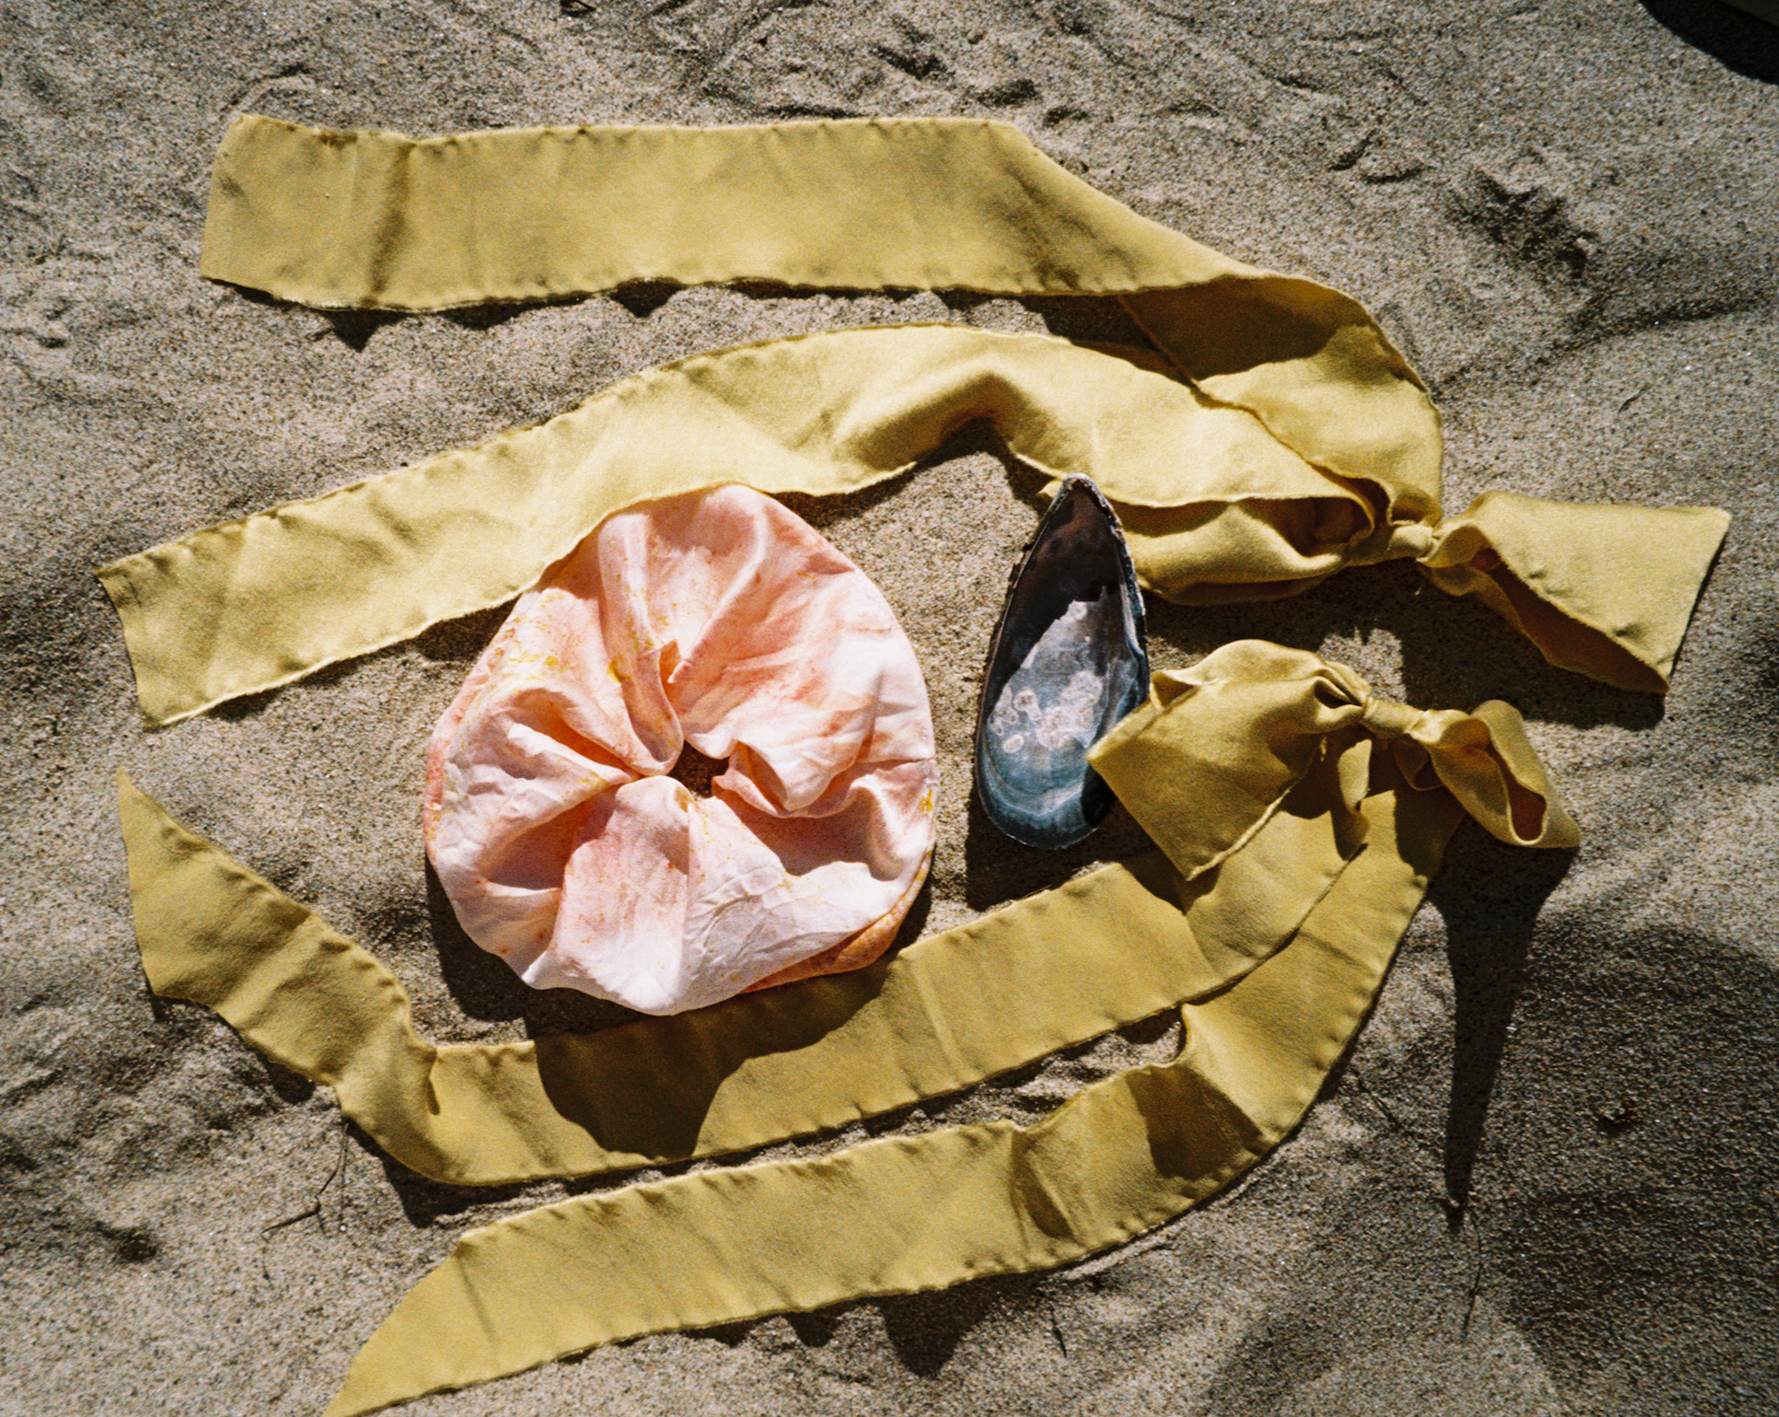 Two Silk green plant dyed bows are on the beach surround a mussel shell and a peach colored silk scrunchie 